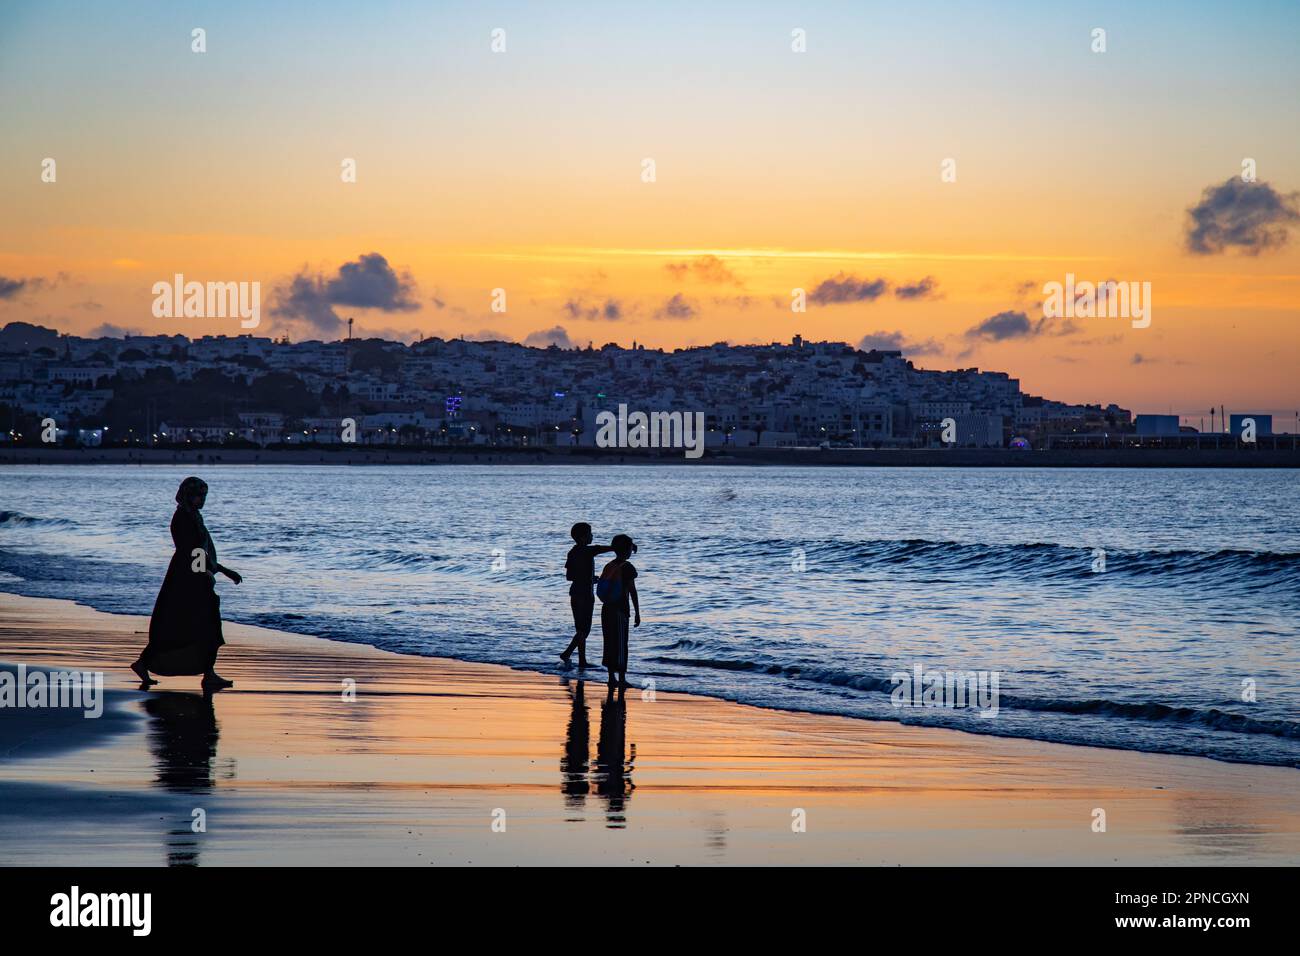 Tangier, Morocco 2022: kids silhouette in a scenic sunset in the seafront promenade Stock Photo